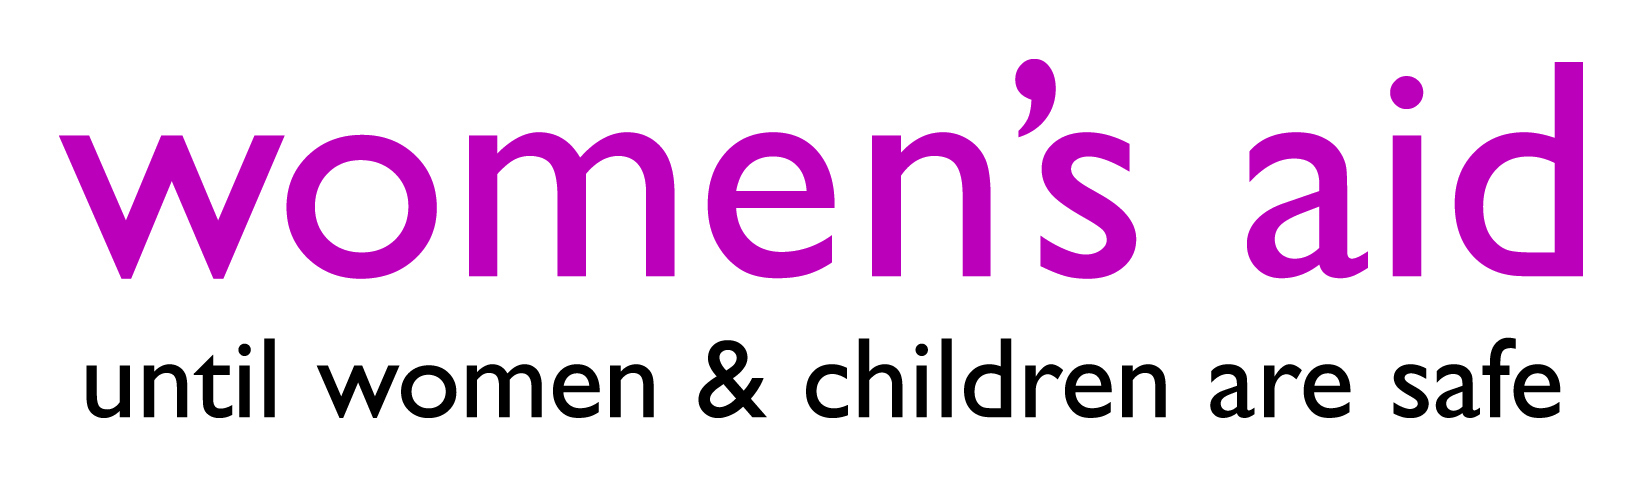 logo for Women's Aid Federation of England